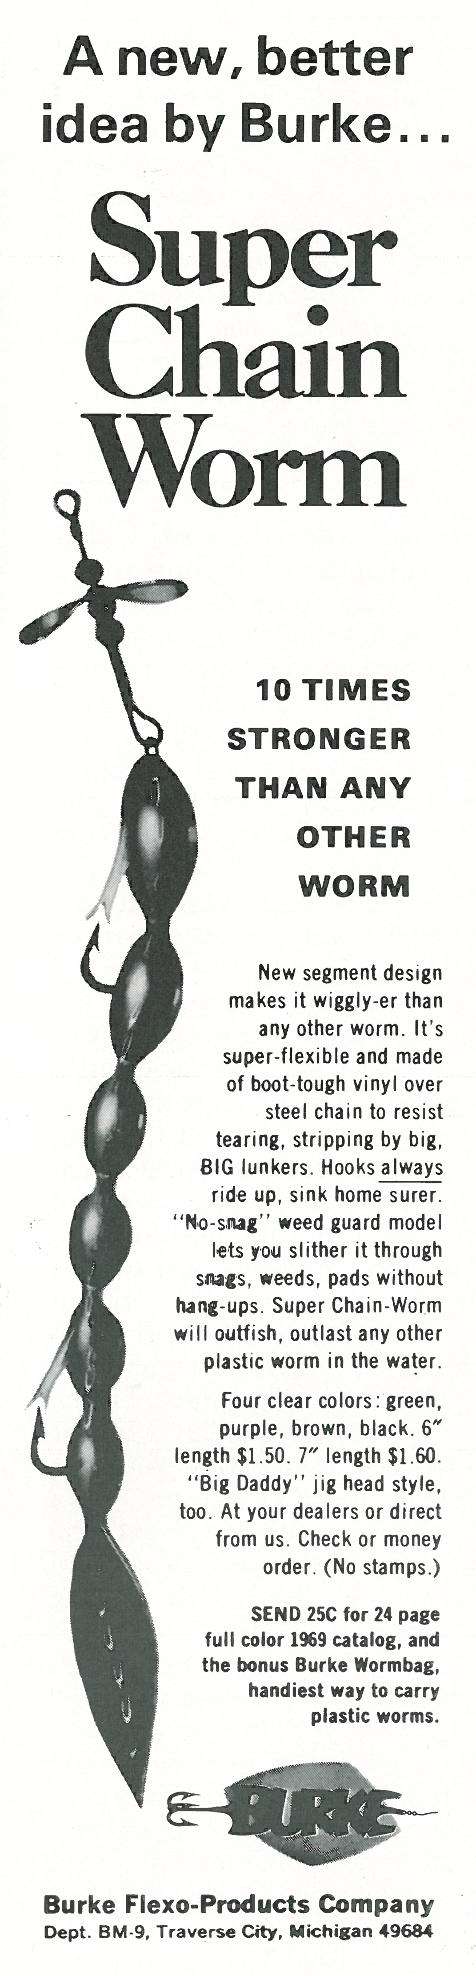 Burke Flexo-Products introduces the Super Chain Worm.